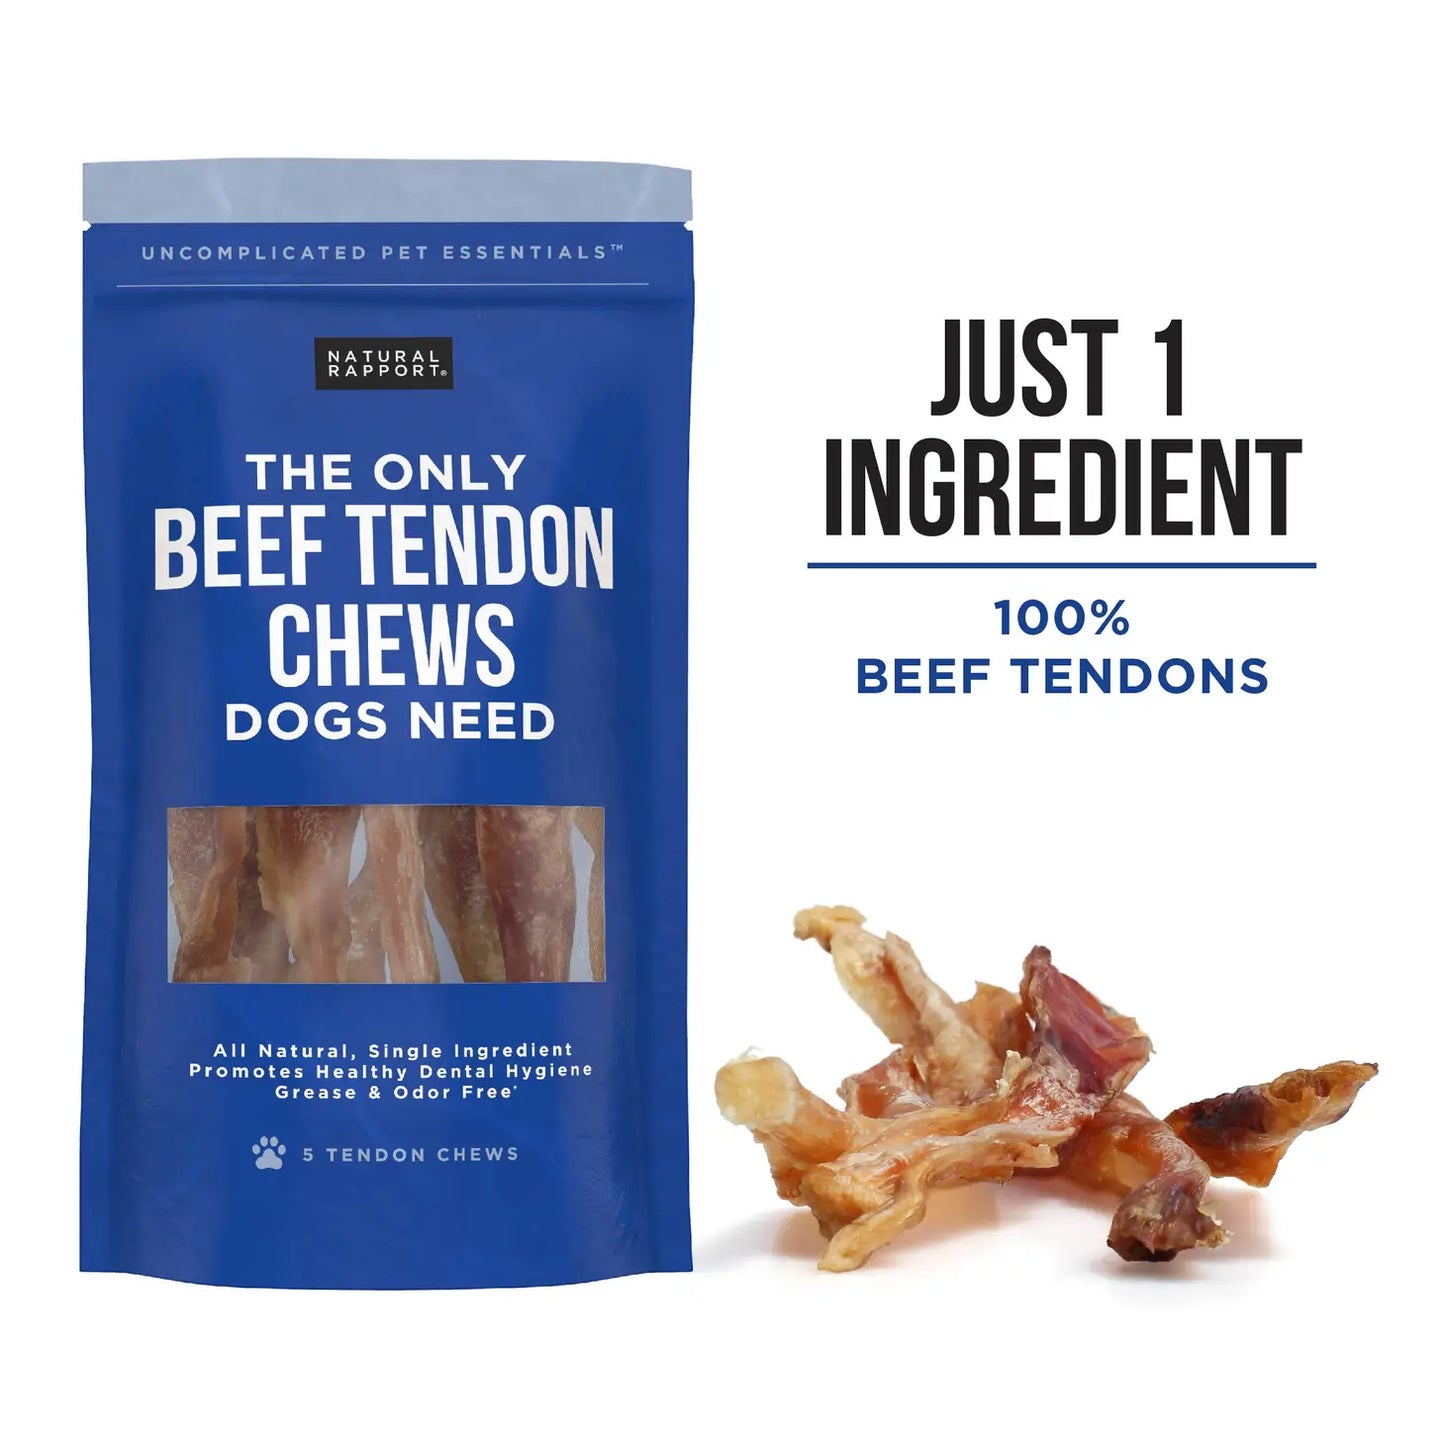 Natural Rapport The Only Beef Tendon Chews Dogs Need